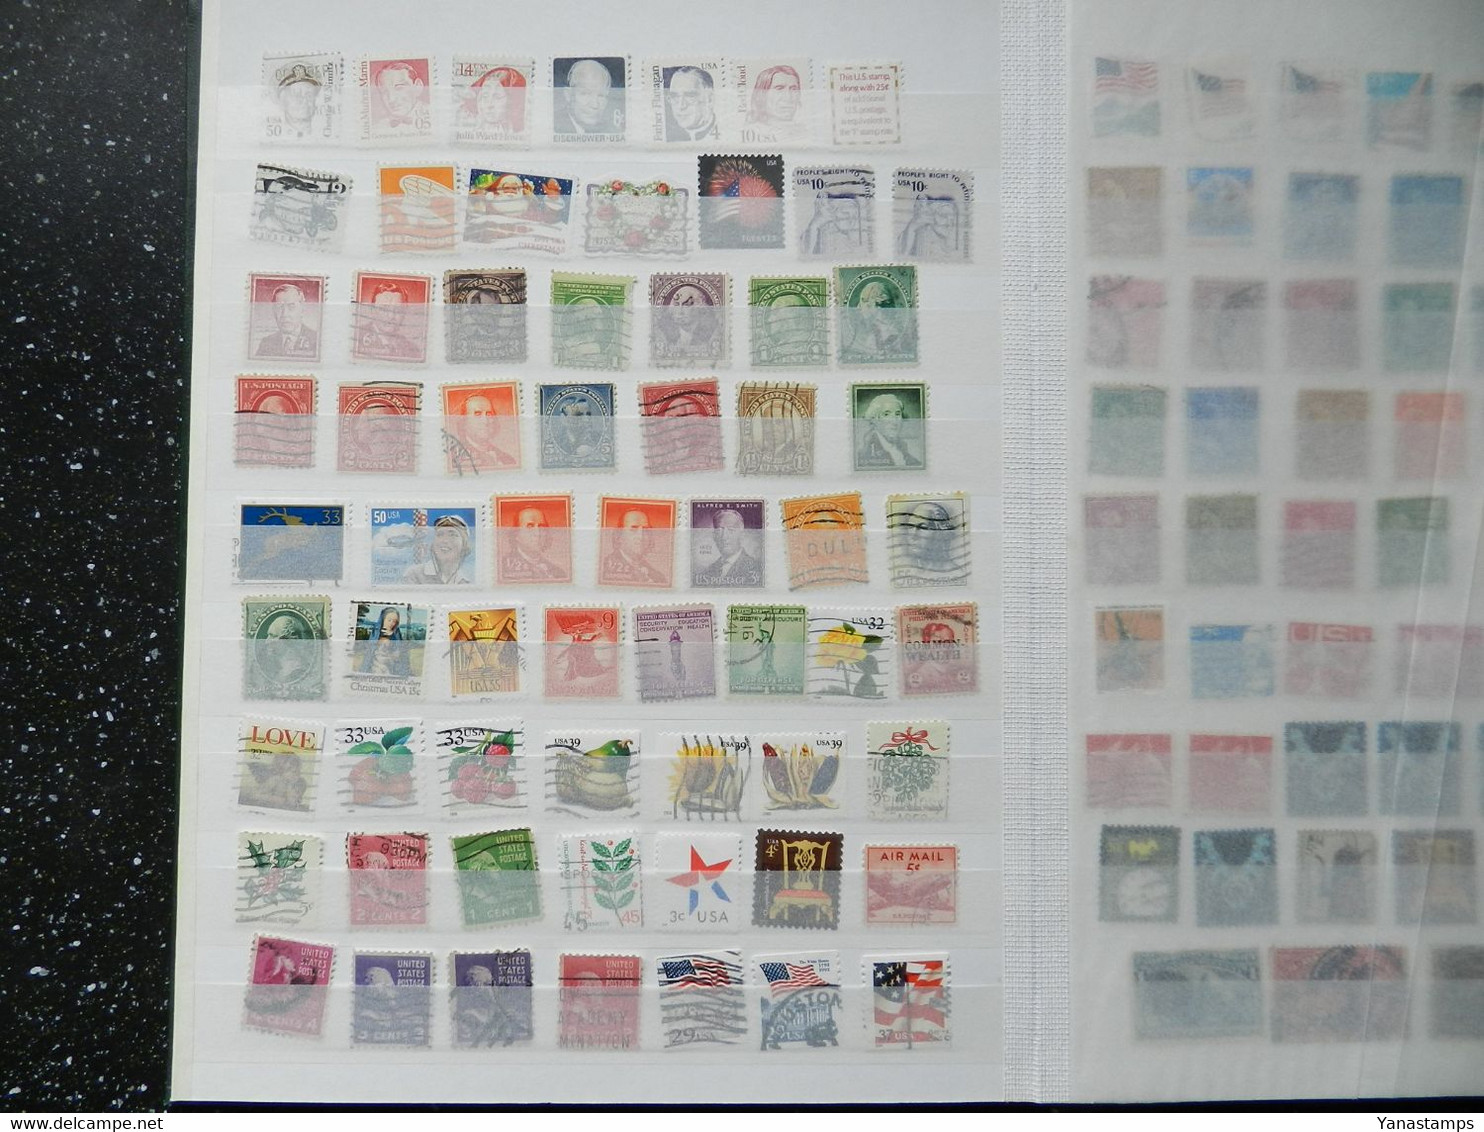 U.S.A. : nice slection of defs , over 1000 stamps, please look